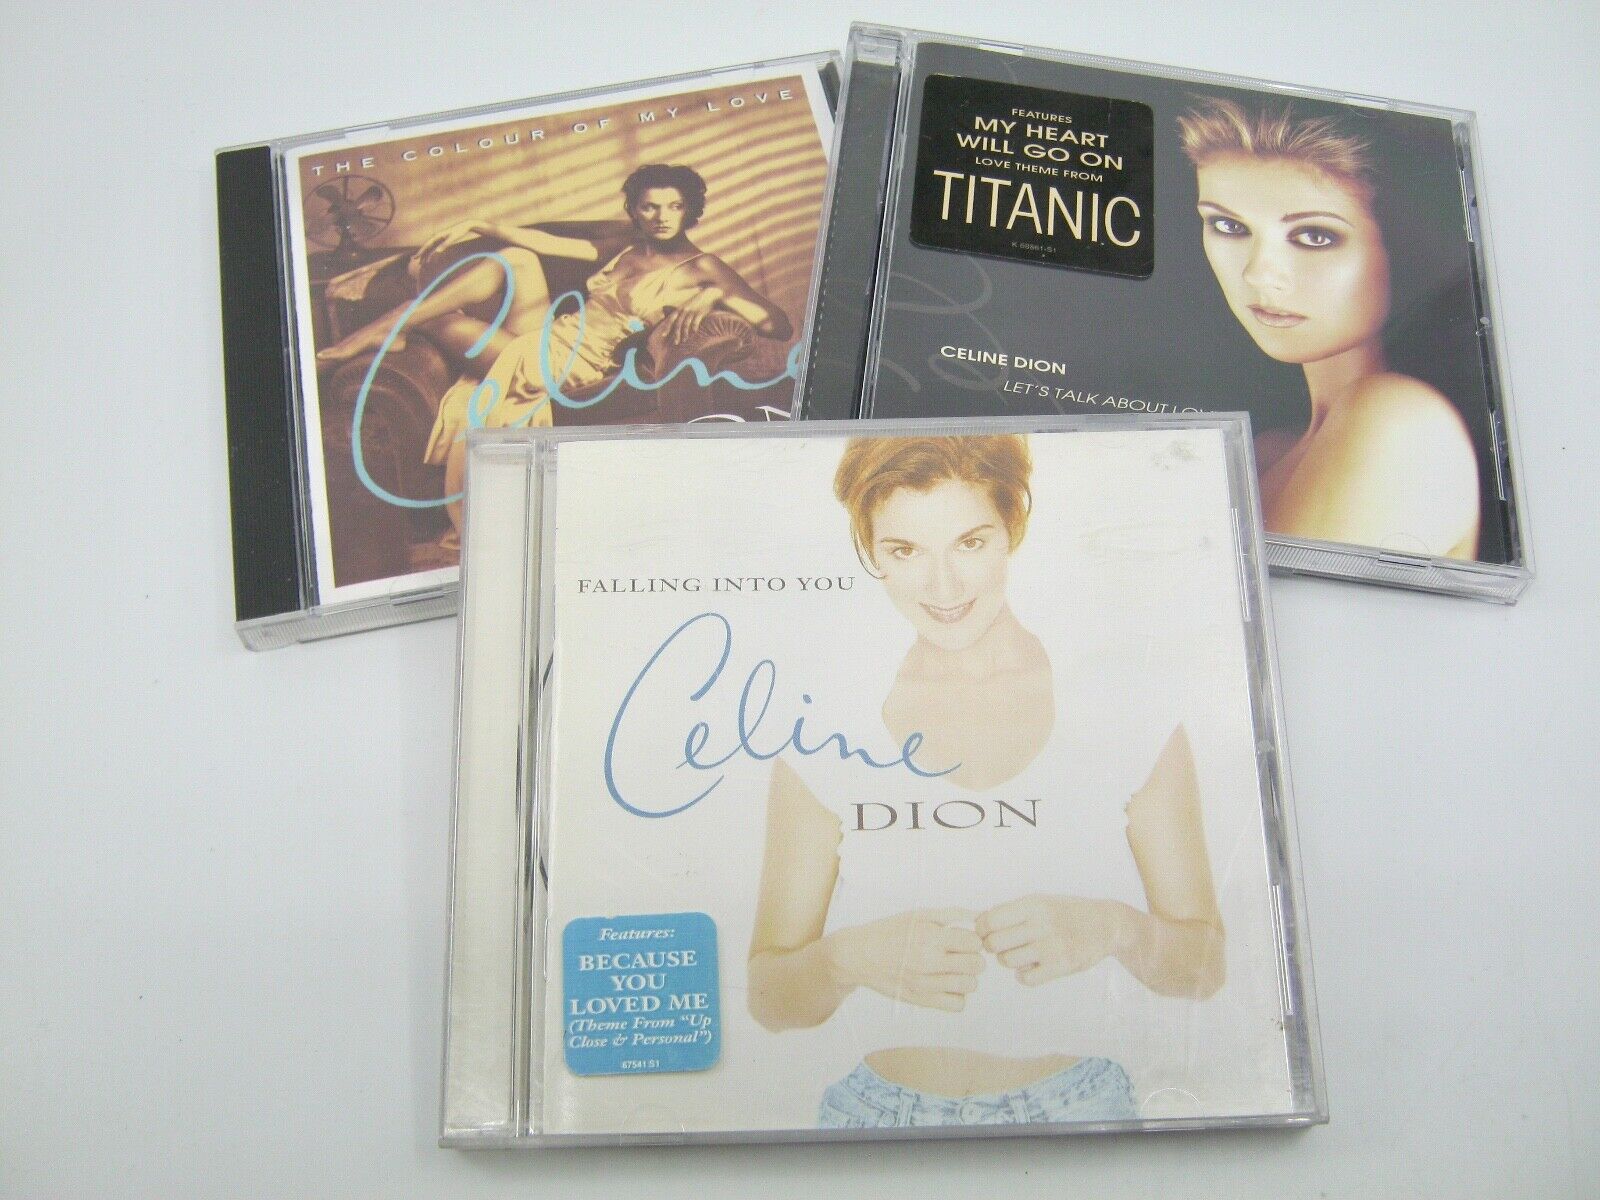 Lot of 3 Celine Dion Cds My Heart Will Go On Falling Into You Colour of My Love